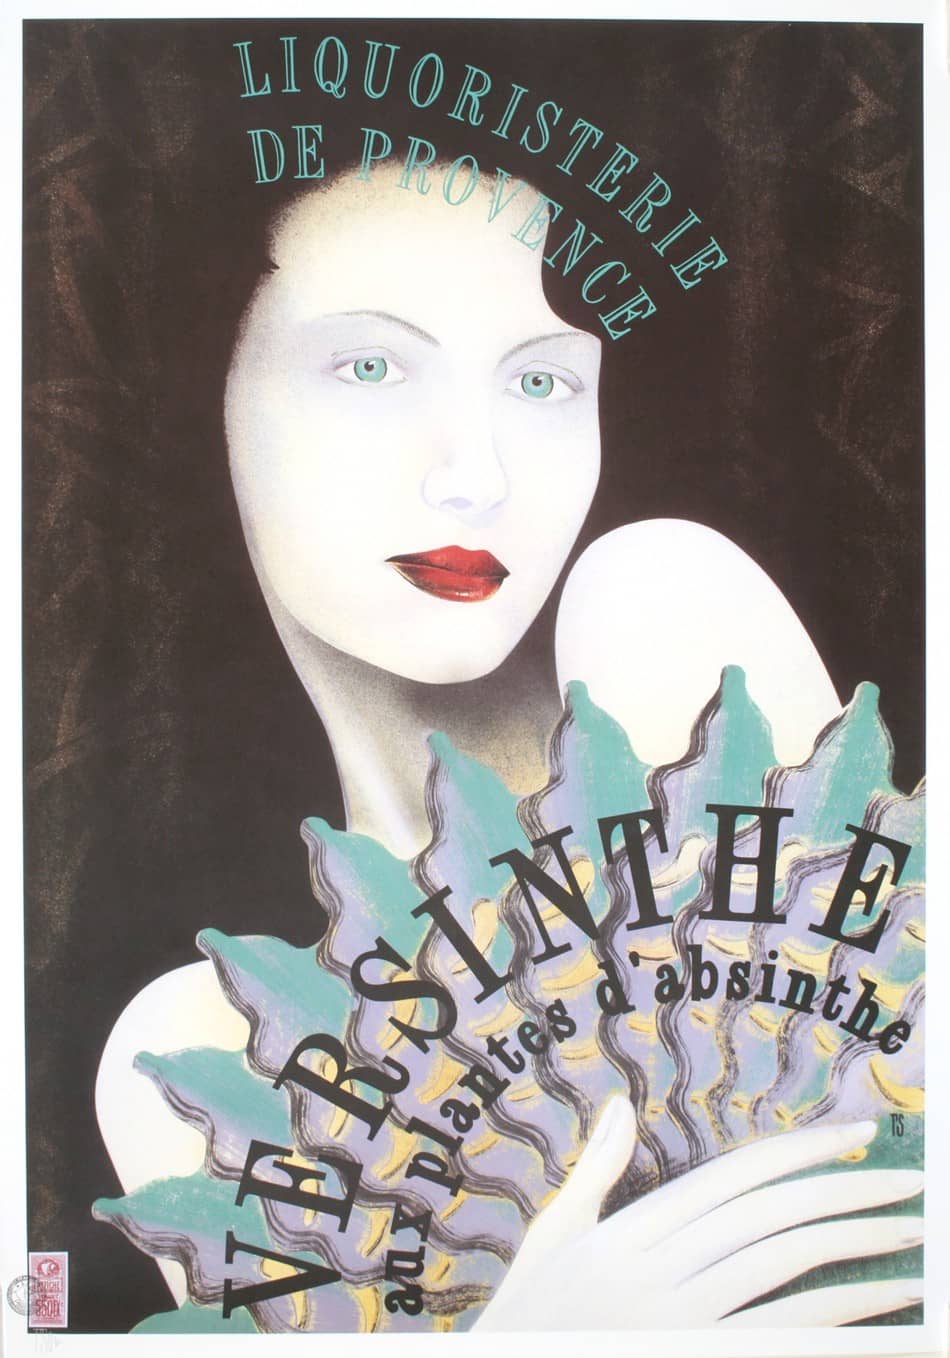 Original Versinthe Poster for Absinthe by Philippe Sommer 2000 Hand Signed